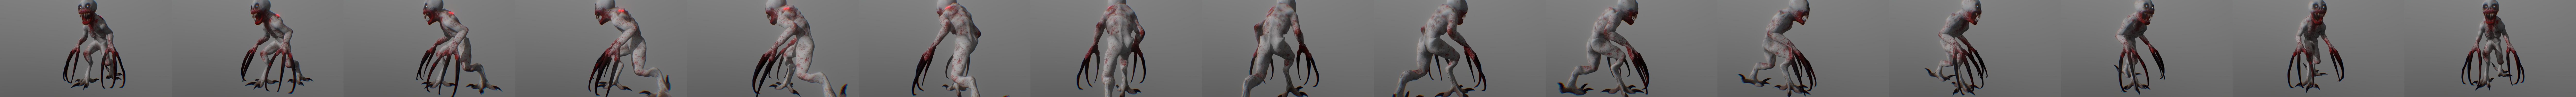 The Rake (Remastered) but smooth - Download Free 3D model by cthulhu903  (@cthulhu903) [f060b24]